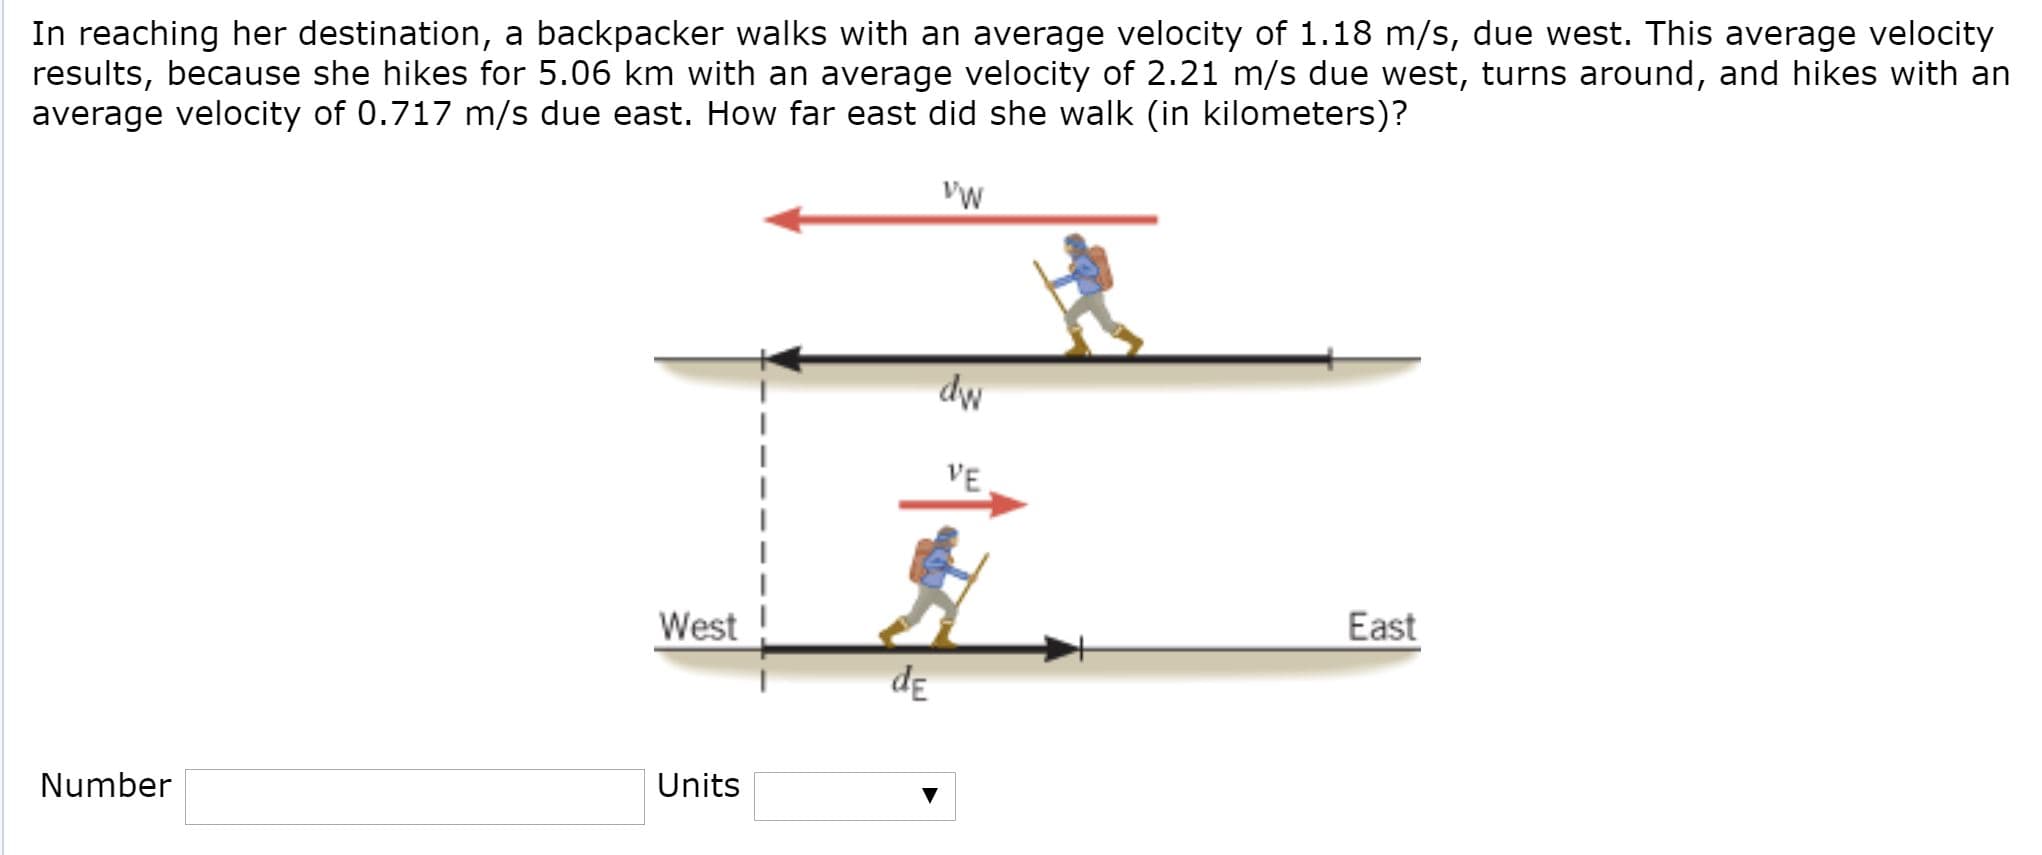 In reaching her destination, a backpacker walks with an average velocity of 1.18 m/s, due west. This average velocity
results, because she hikes for 5.06 km with an average velocity of 2.21 m/s due west, turns around, and hikes with an
average velocity of 0.717 m/s due east. How far east did she walk (in kilometers)?
dw
VE
East
West
de
Units
Number
